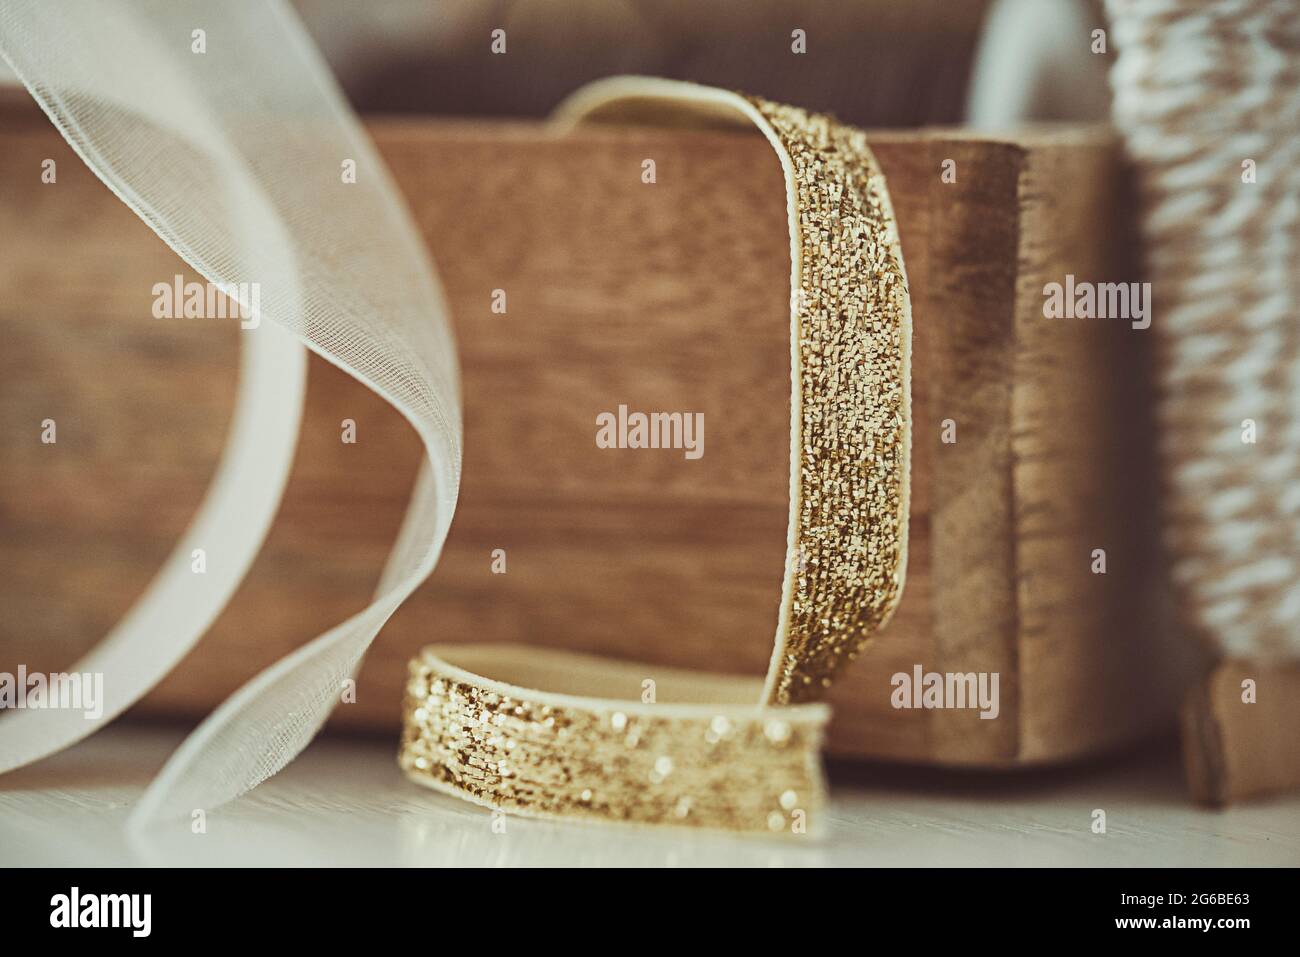 Close-up of ribbons in a wooden box on a table Stock Photo